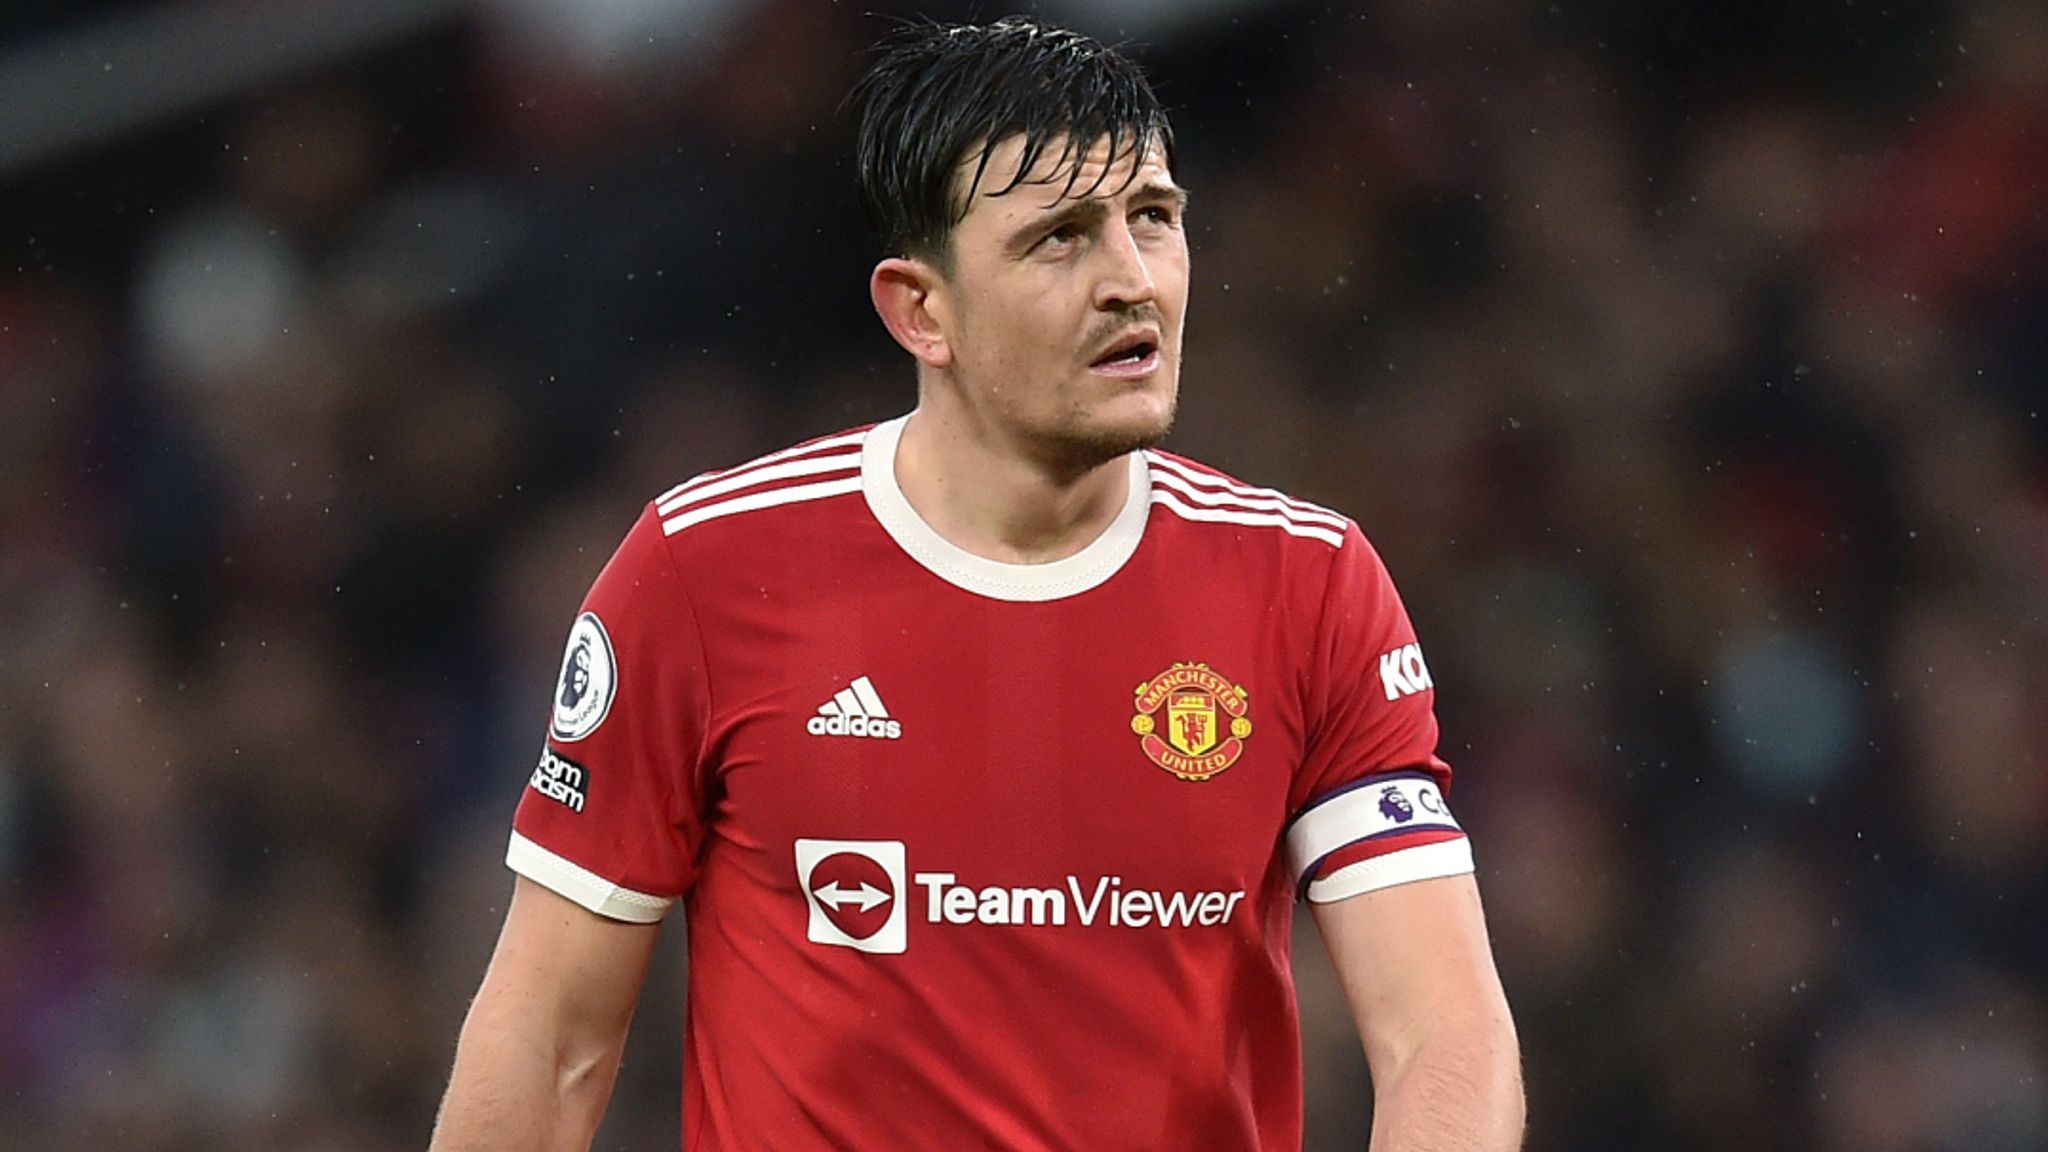 Harry Maguire stripped of Man Utd captaincy